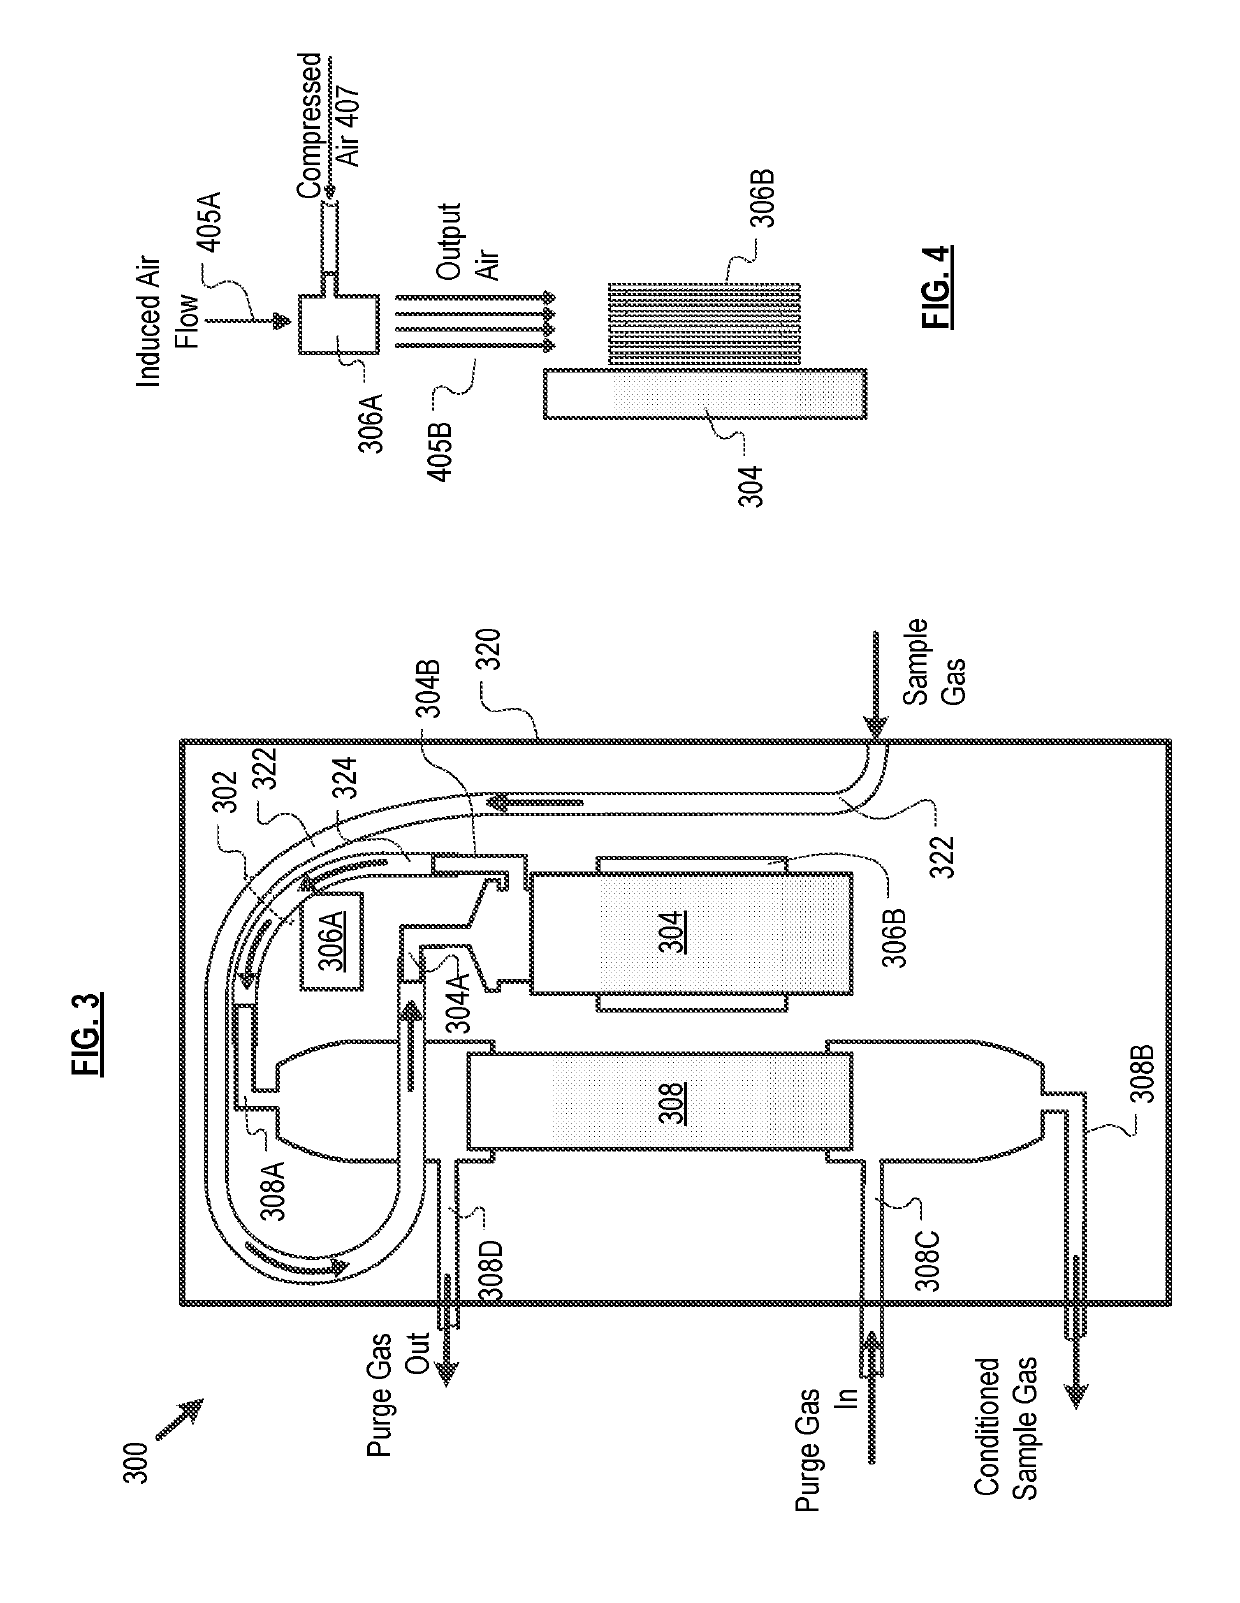 Hybrid Cooler/Dryer and Method Therefor